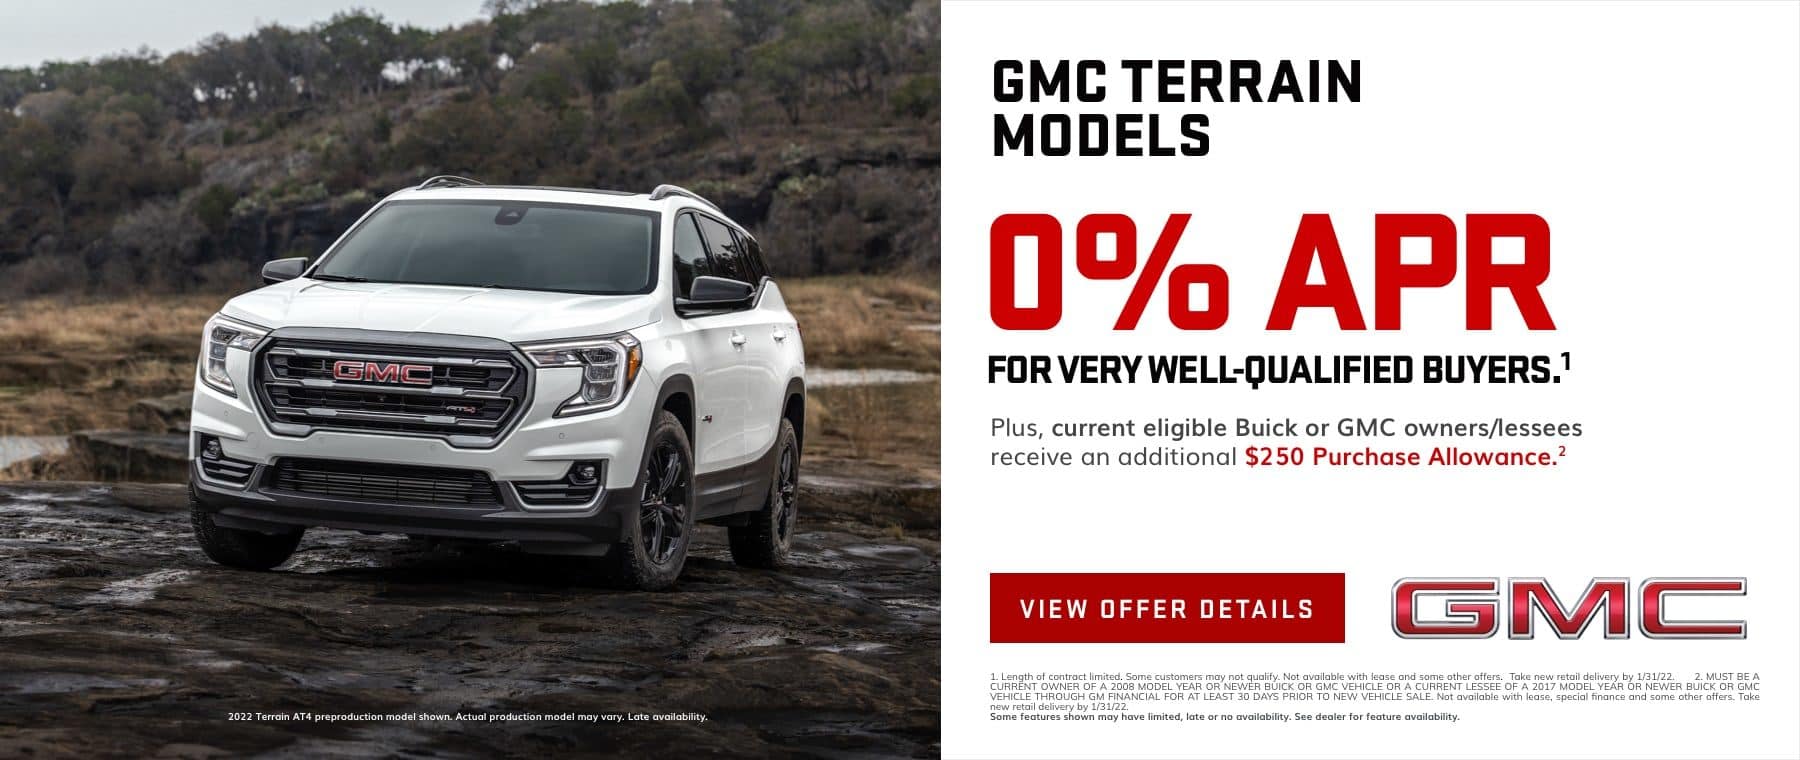 0% APR for very well-qualified buyers.1 Plus, current eligible Buick or GMC owners/lessees receive an additional $250 Purchase Allowance on most models.2